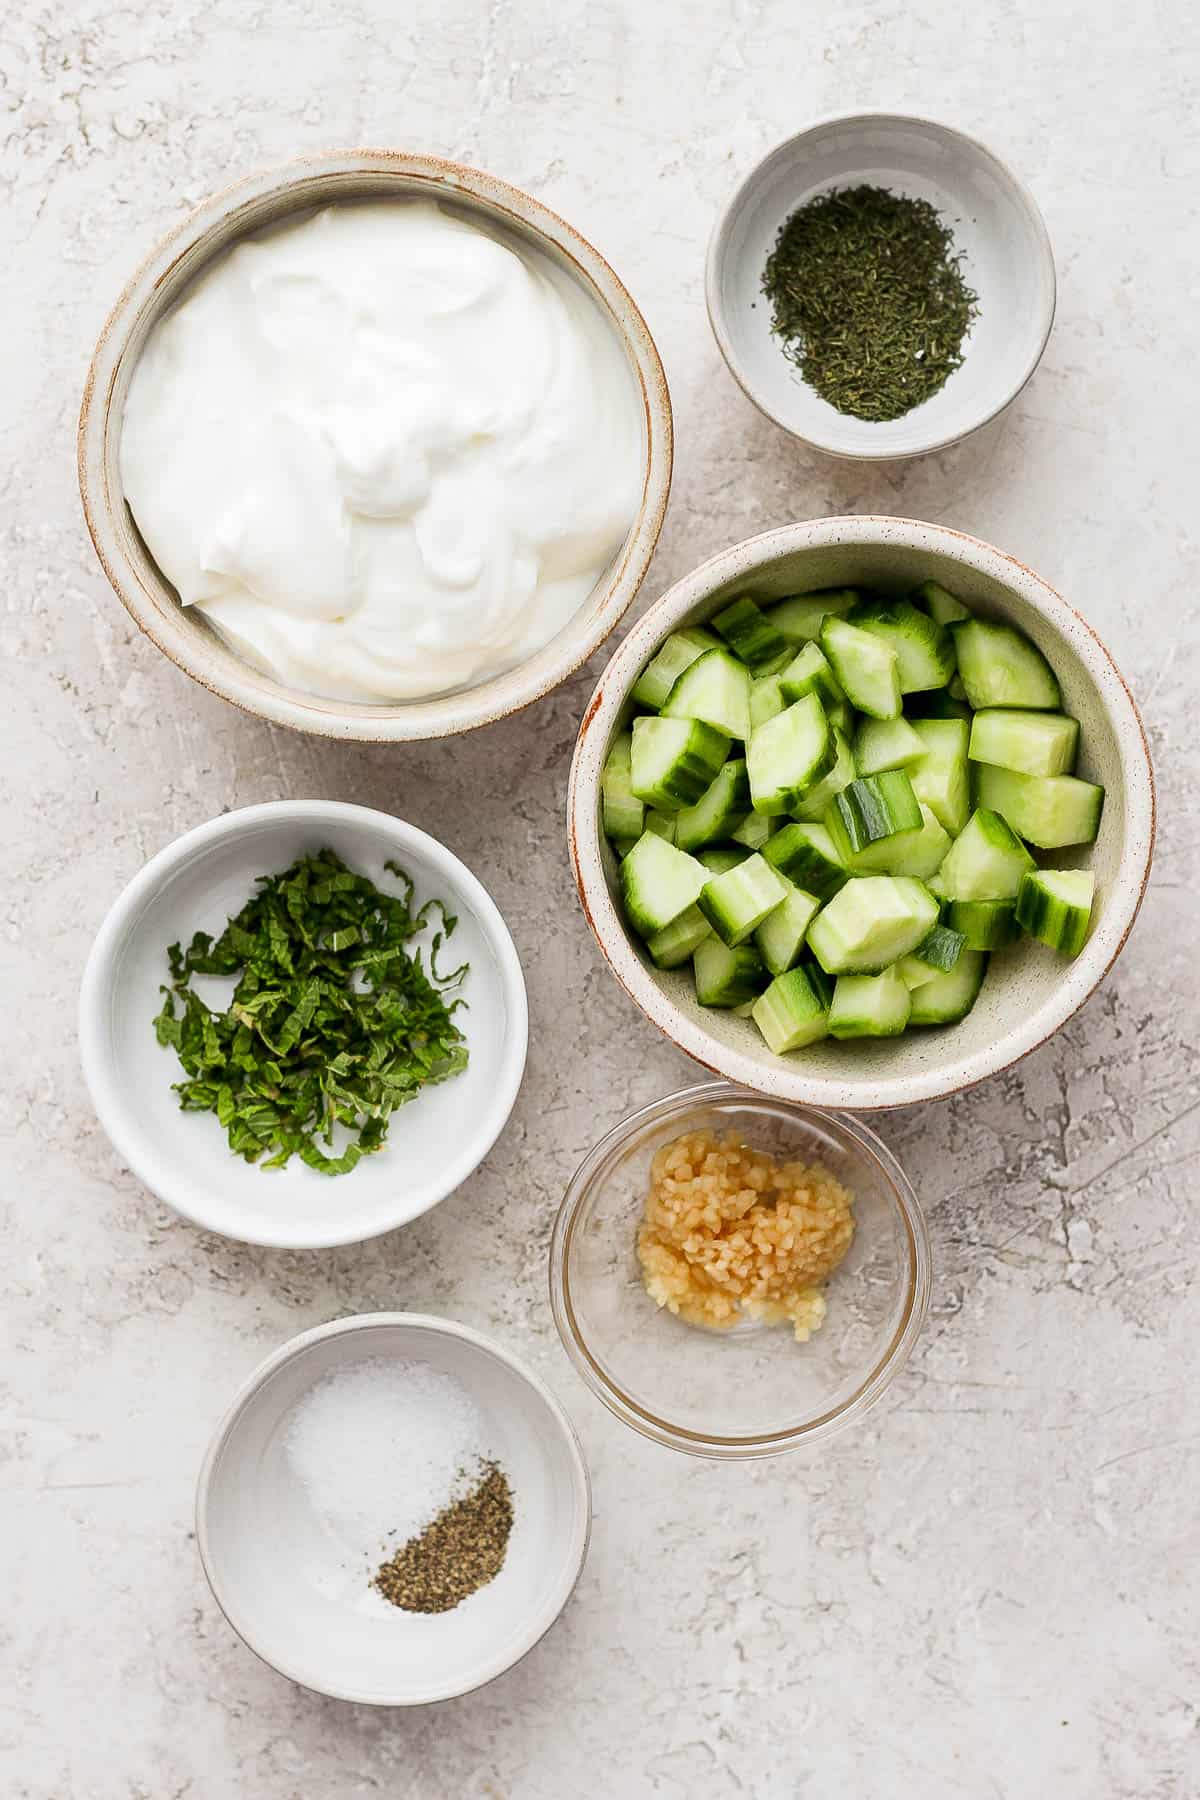 Six small bowls, each holding prepped and measured ingredients for the tzatziki sauce; a bowl of dill, a bowl of Greek yogurt, a bowl of peeled and cut quartered cucumber, a bowl of fresh sliced mint, a bowl of minced garlic, and a bowl of kosher salt and ground black pepper. 